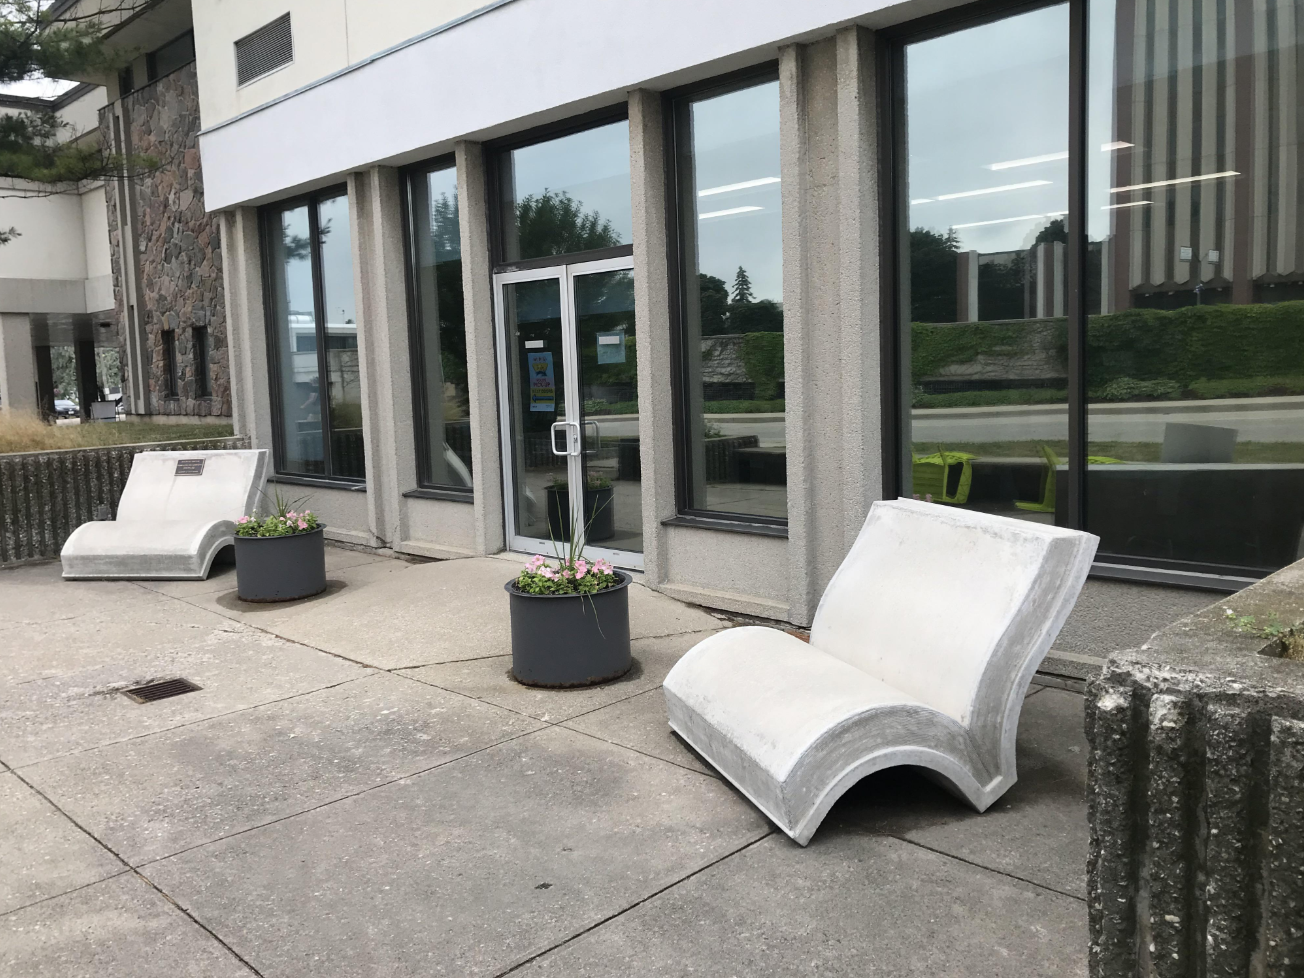 benches outside look like opened books